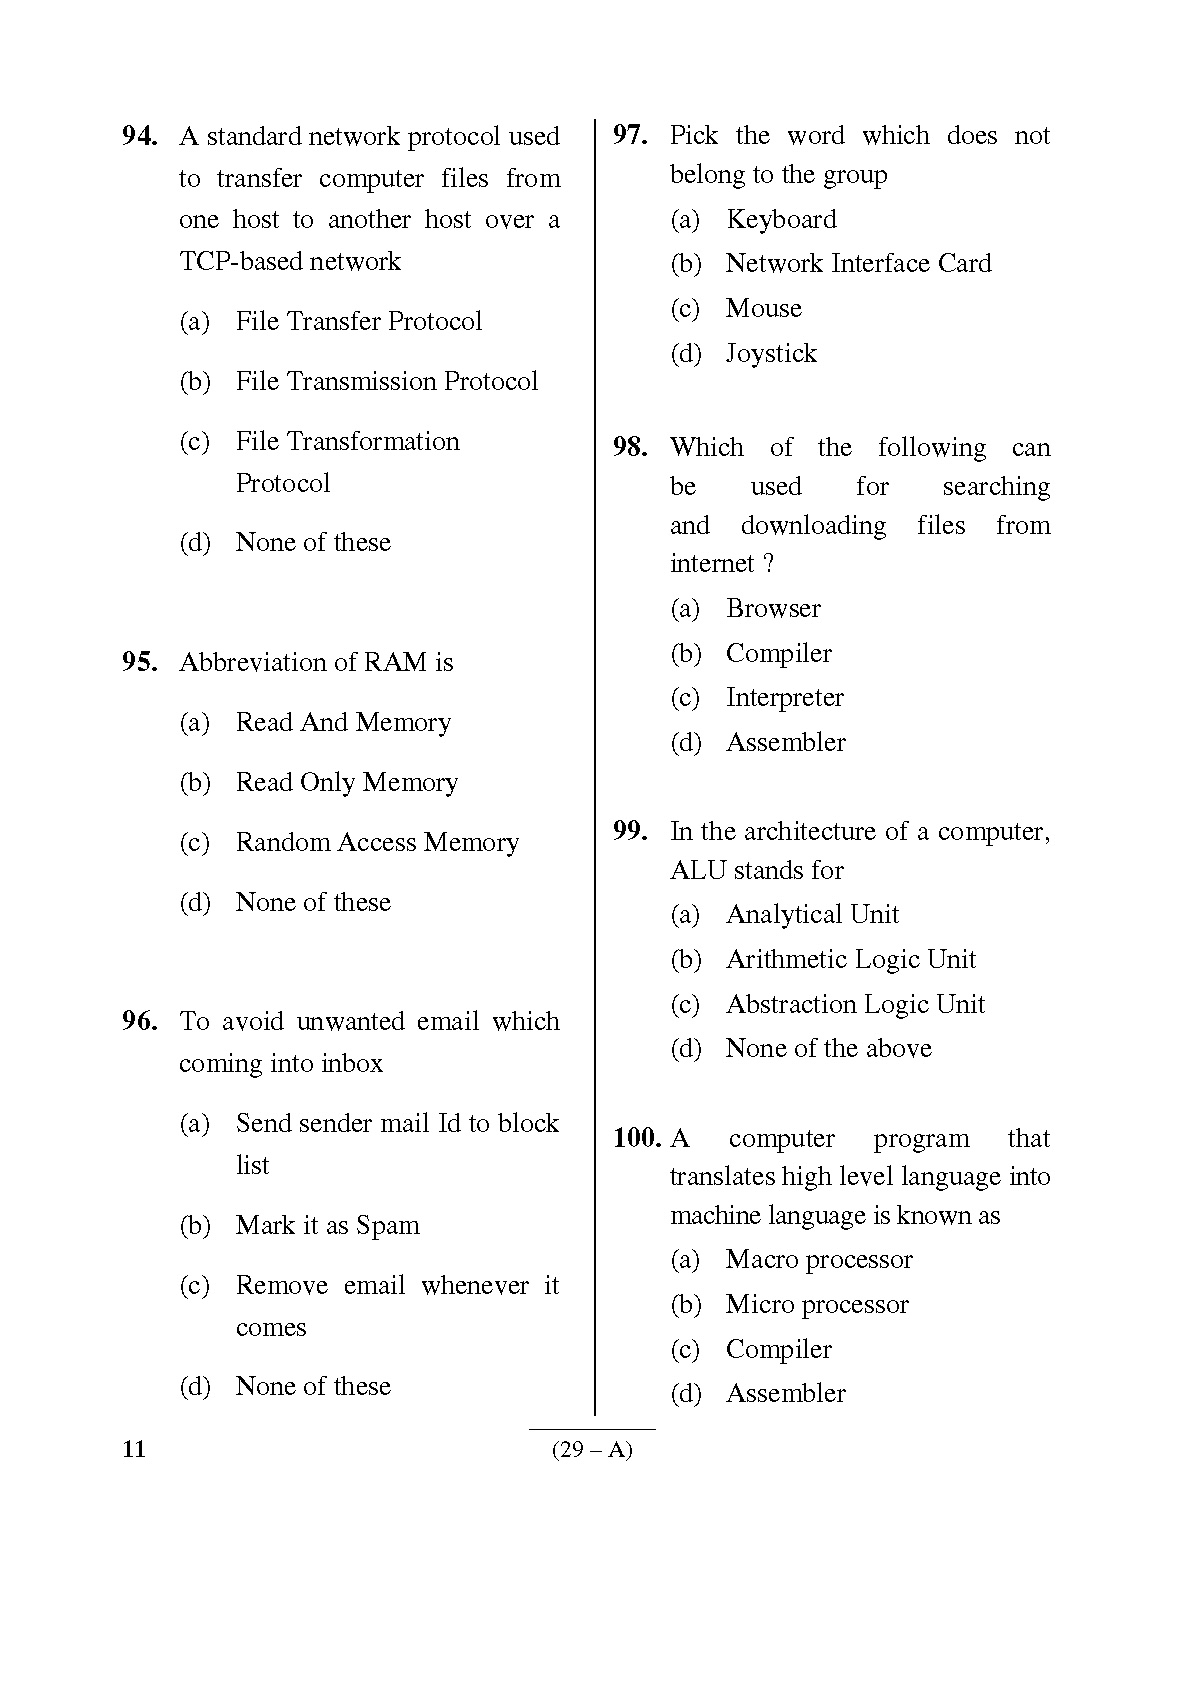 Karnataka PSC First Division Computer Assistants Exam Sample Question Paper 29